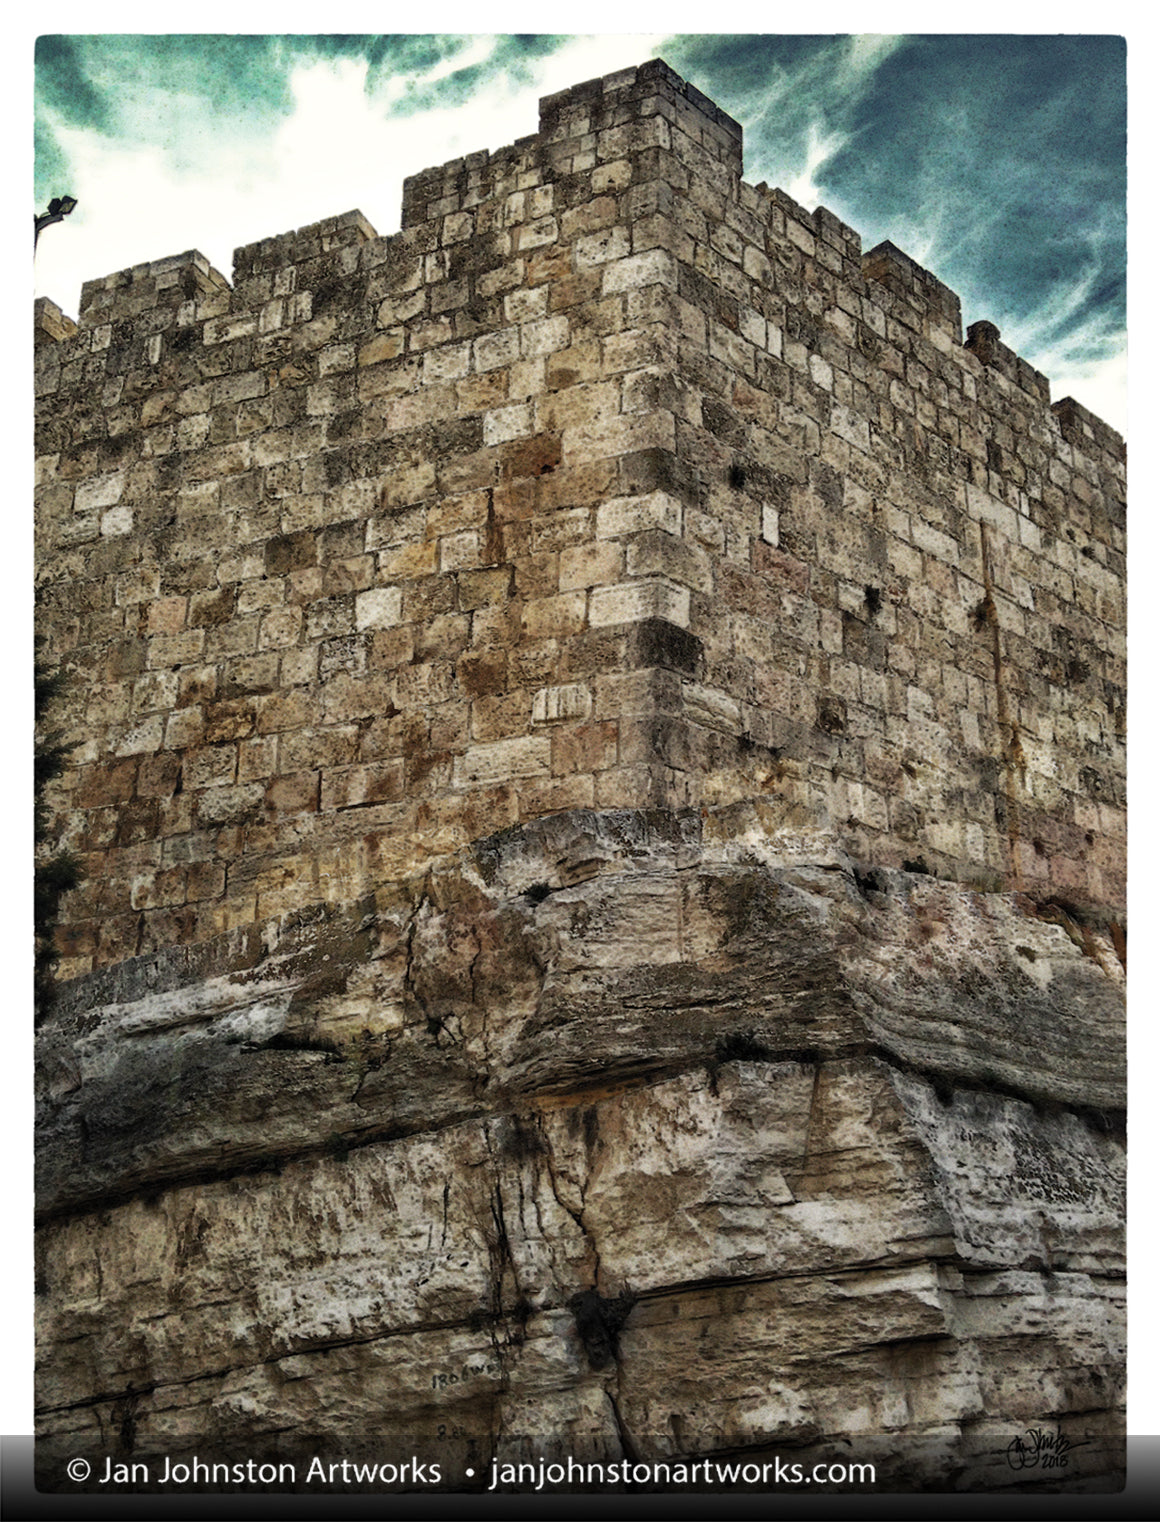 Bedrock Supporting the Wall around the Old City in Jerusalem